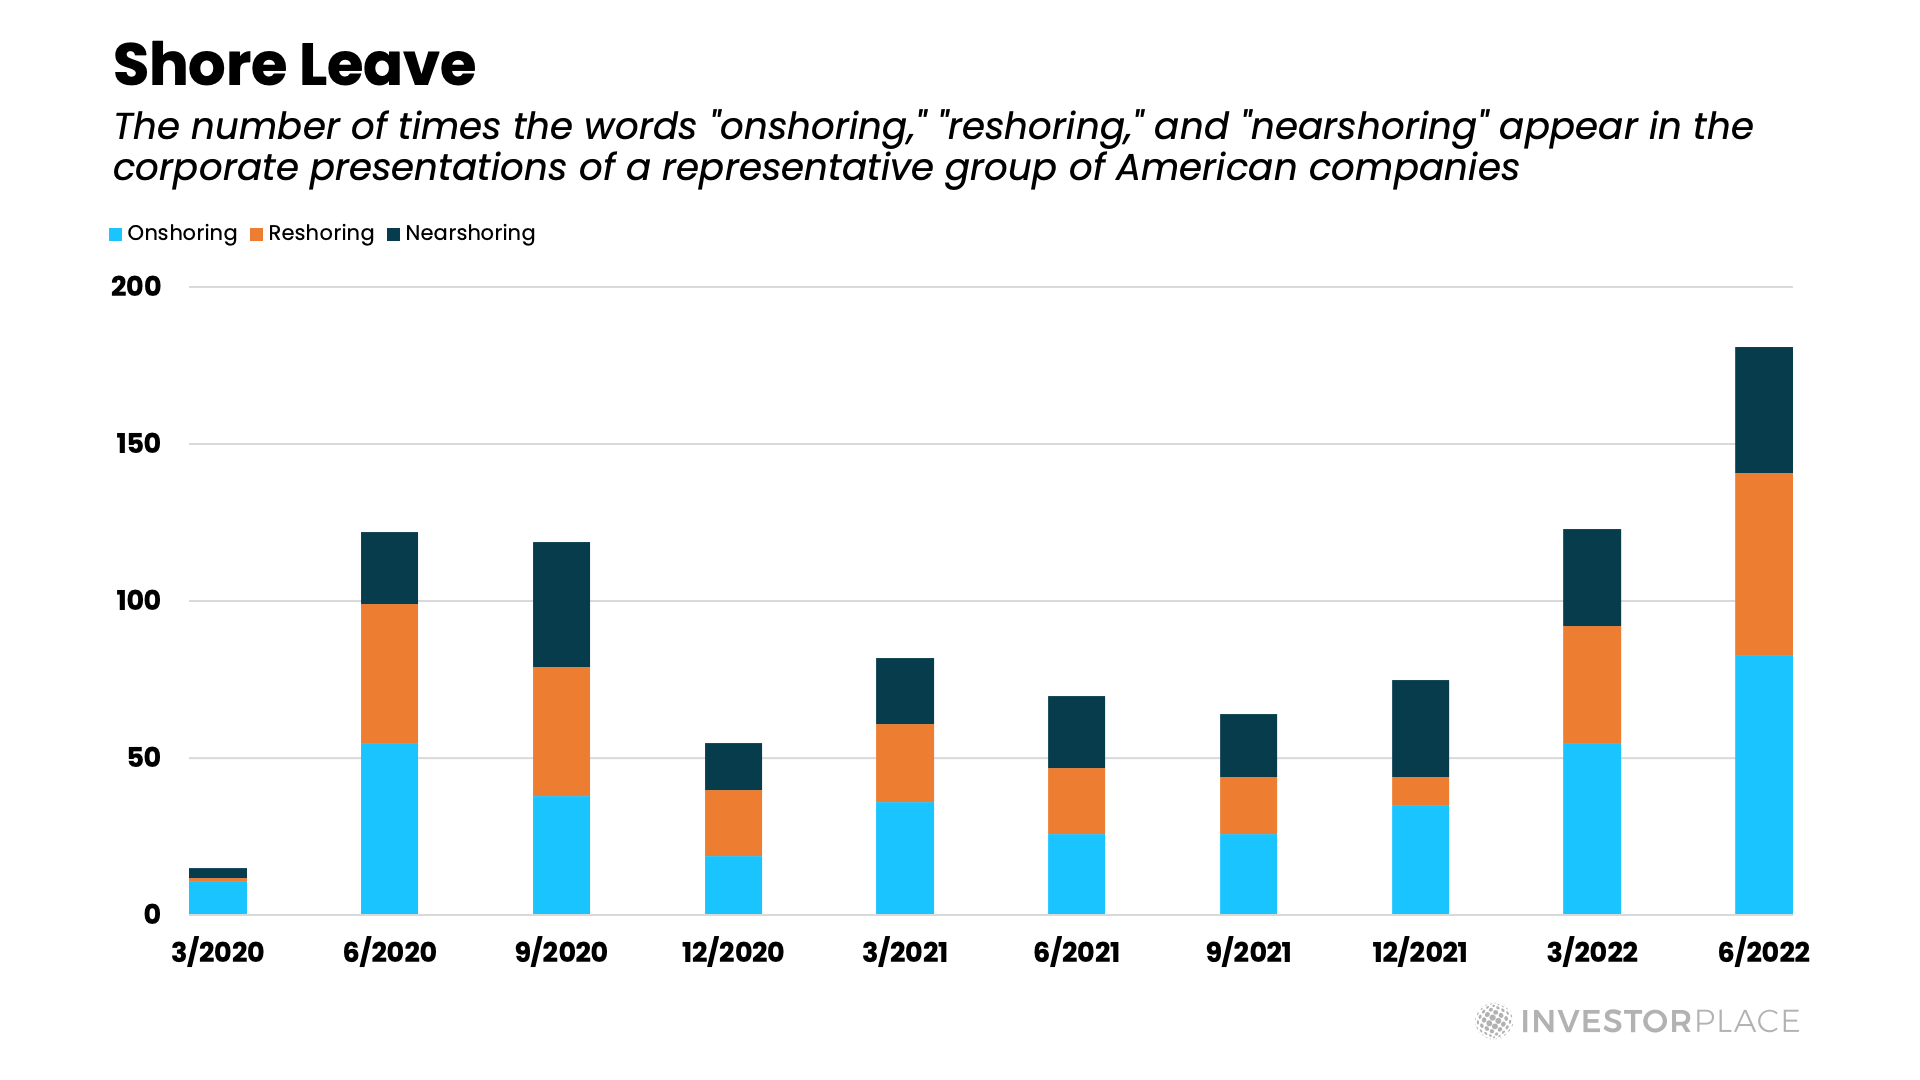 A bar chart that shows the number of times the words "onshoring", "reshoring", and "nearshoring" appear in the corporate presentations of a representative group of American companies. The chart ranges from about 20 times in March 2020 to over 120 times in June and September 2020, trickling a bit in 2021, to nearly 200 times in August 2022